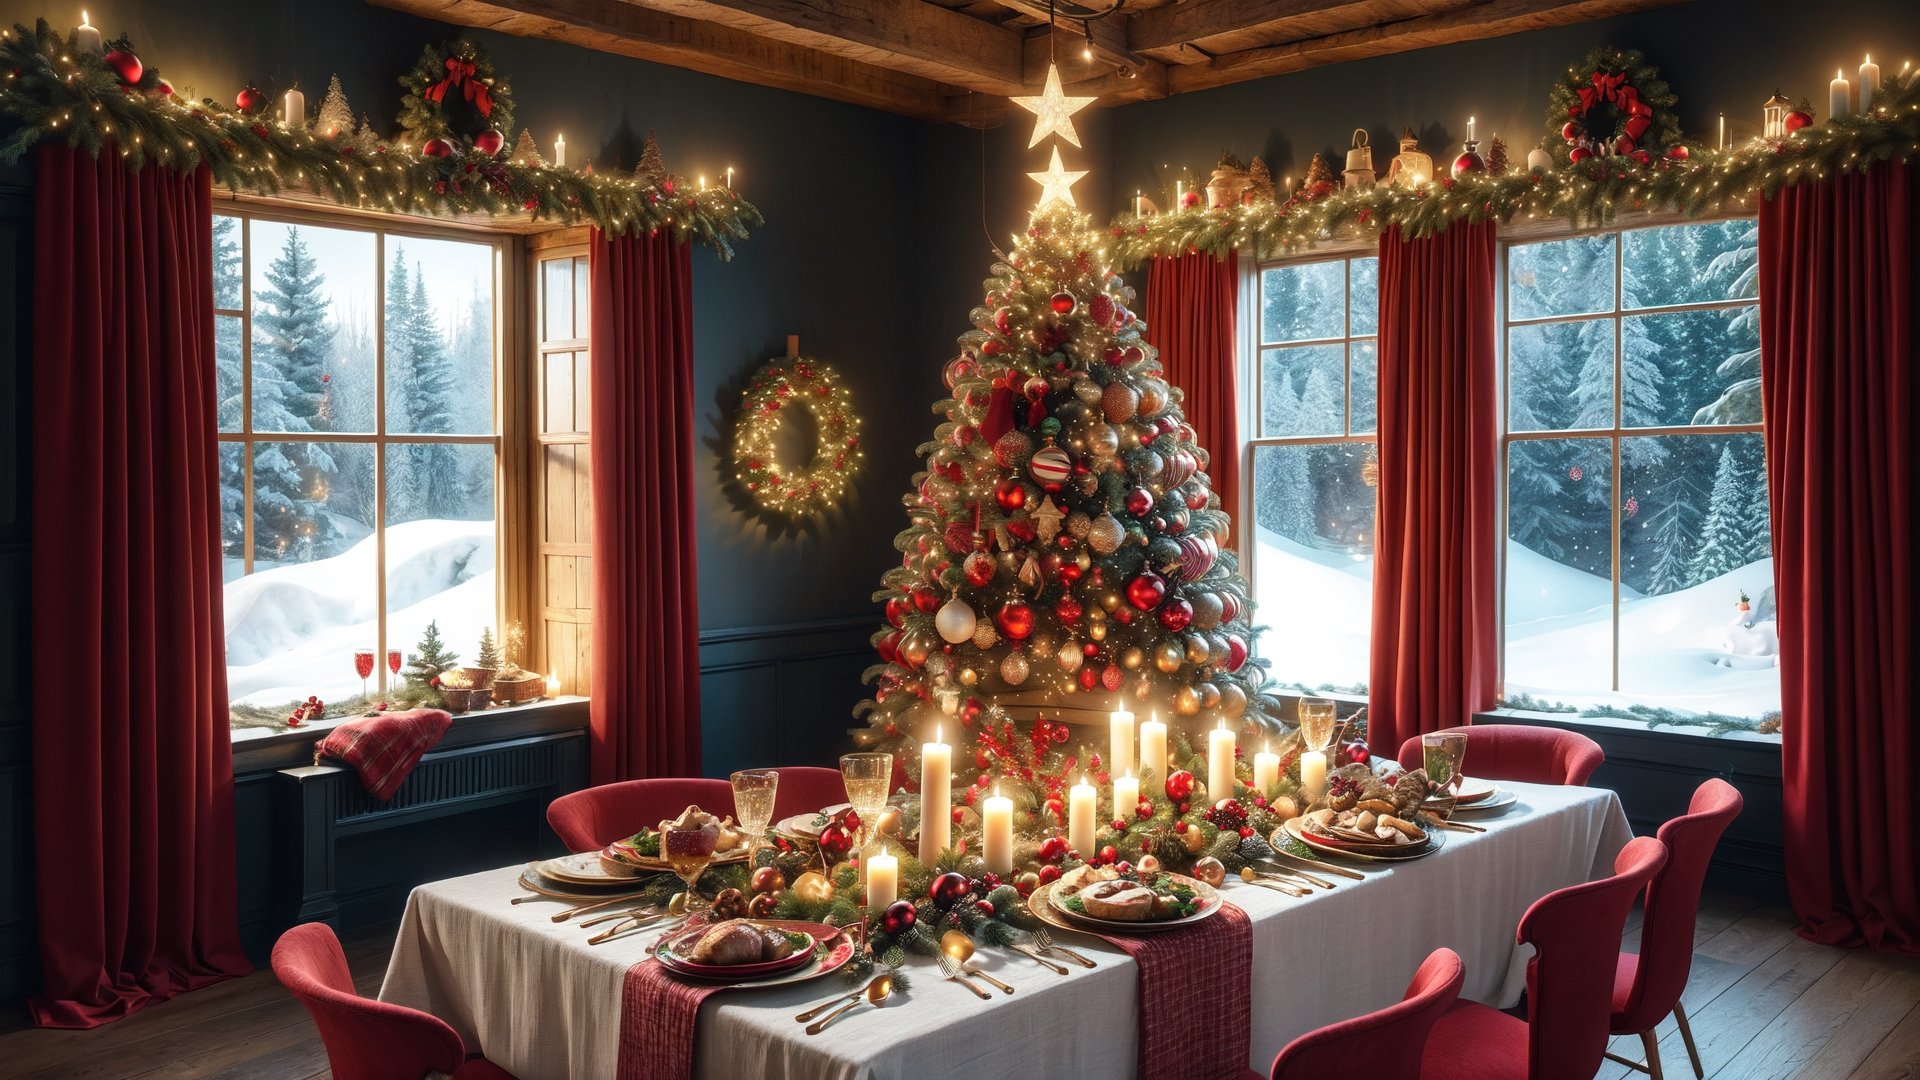 Festivals, In winter, Girls have dinner with Santa Claus, Christmas, Christmas tree, 1Girl, 
Christmas presents, Christmas tea, window overlooking a magical forest, curtains on the window, magic, Christmas background, Mysterious, Mysterious, Christmas Room, A sumptuous feast, 